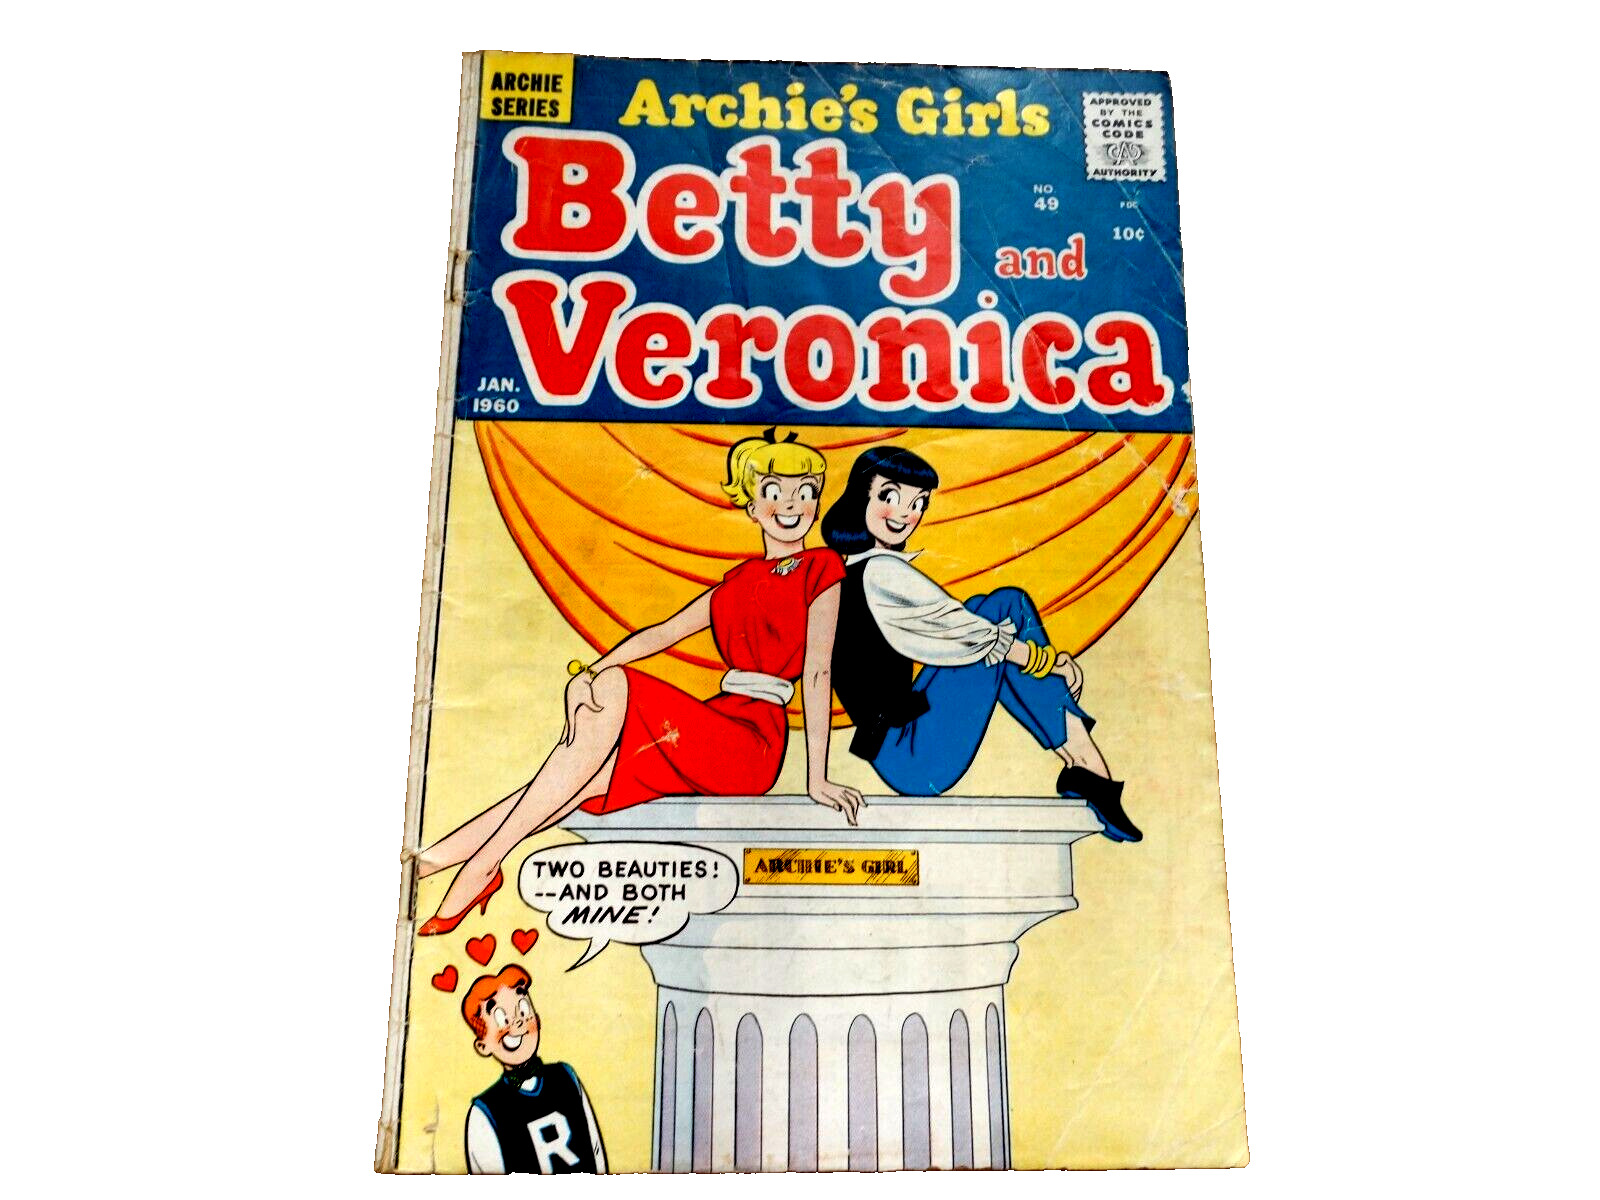 Archie’s Girls Betty and Veronica #49 – January 1960